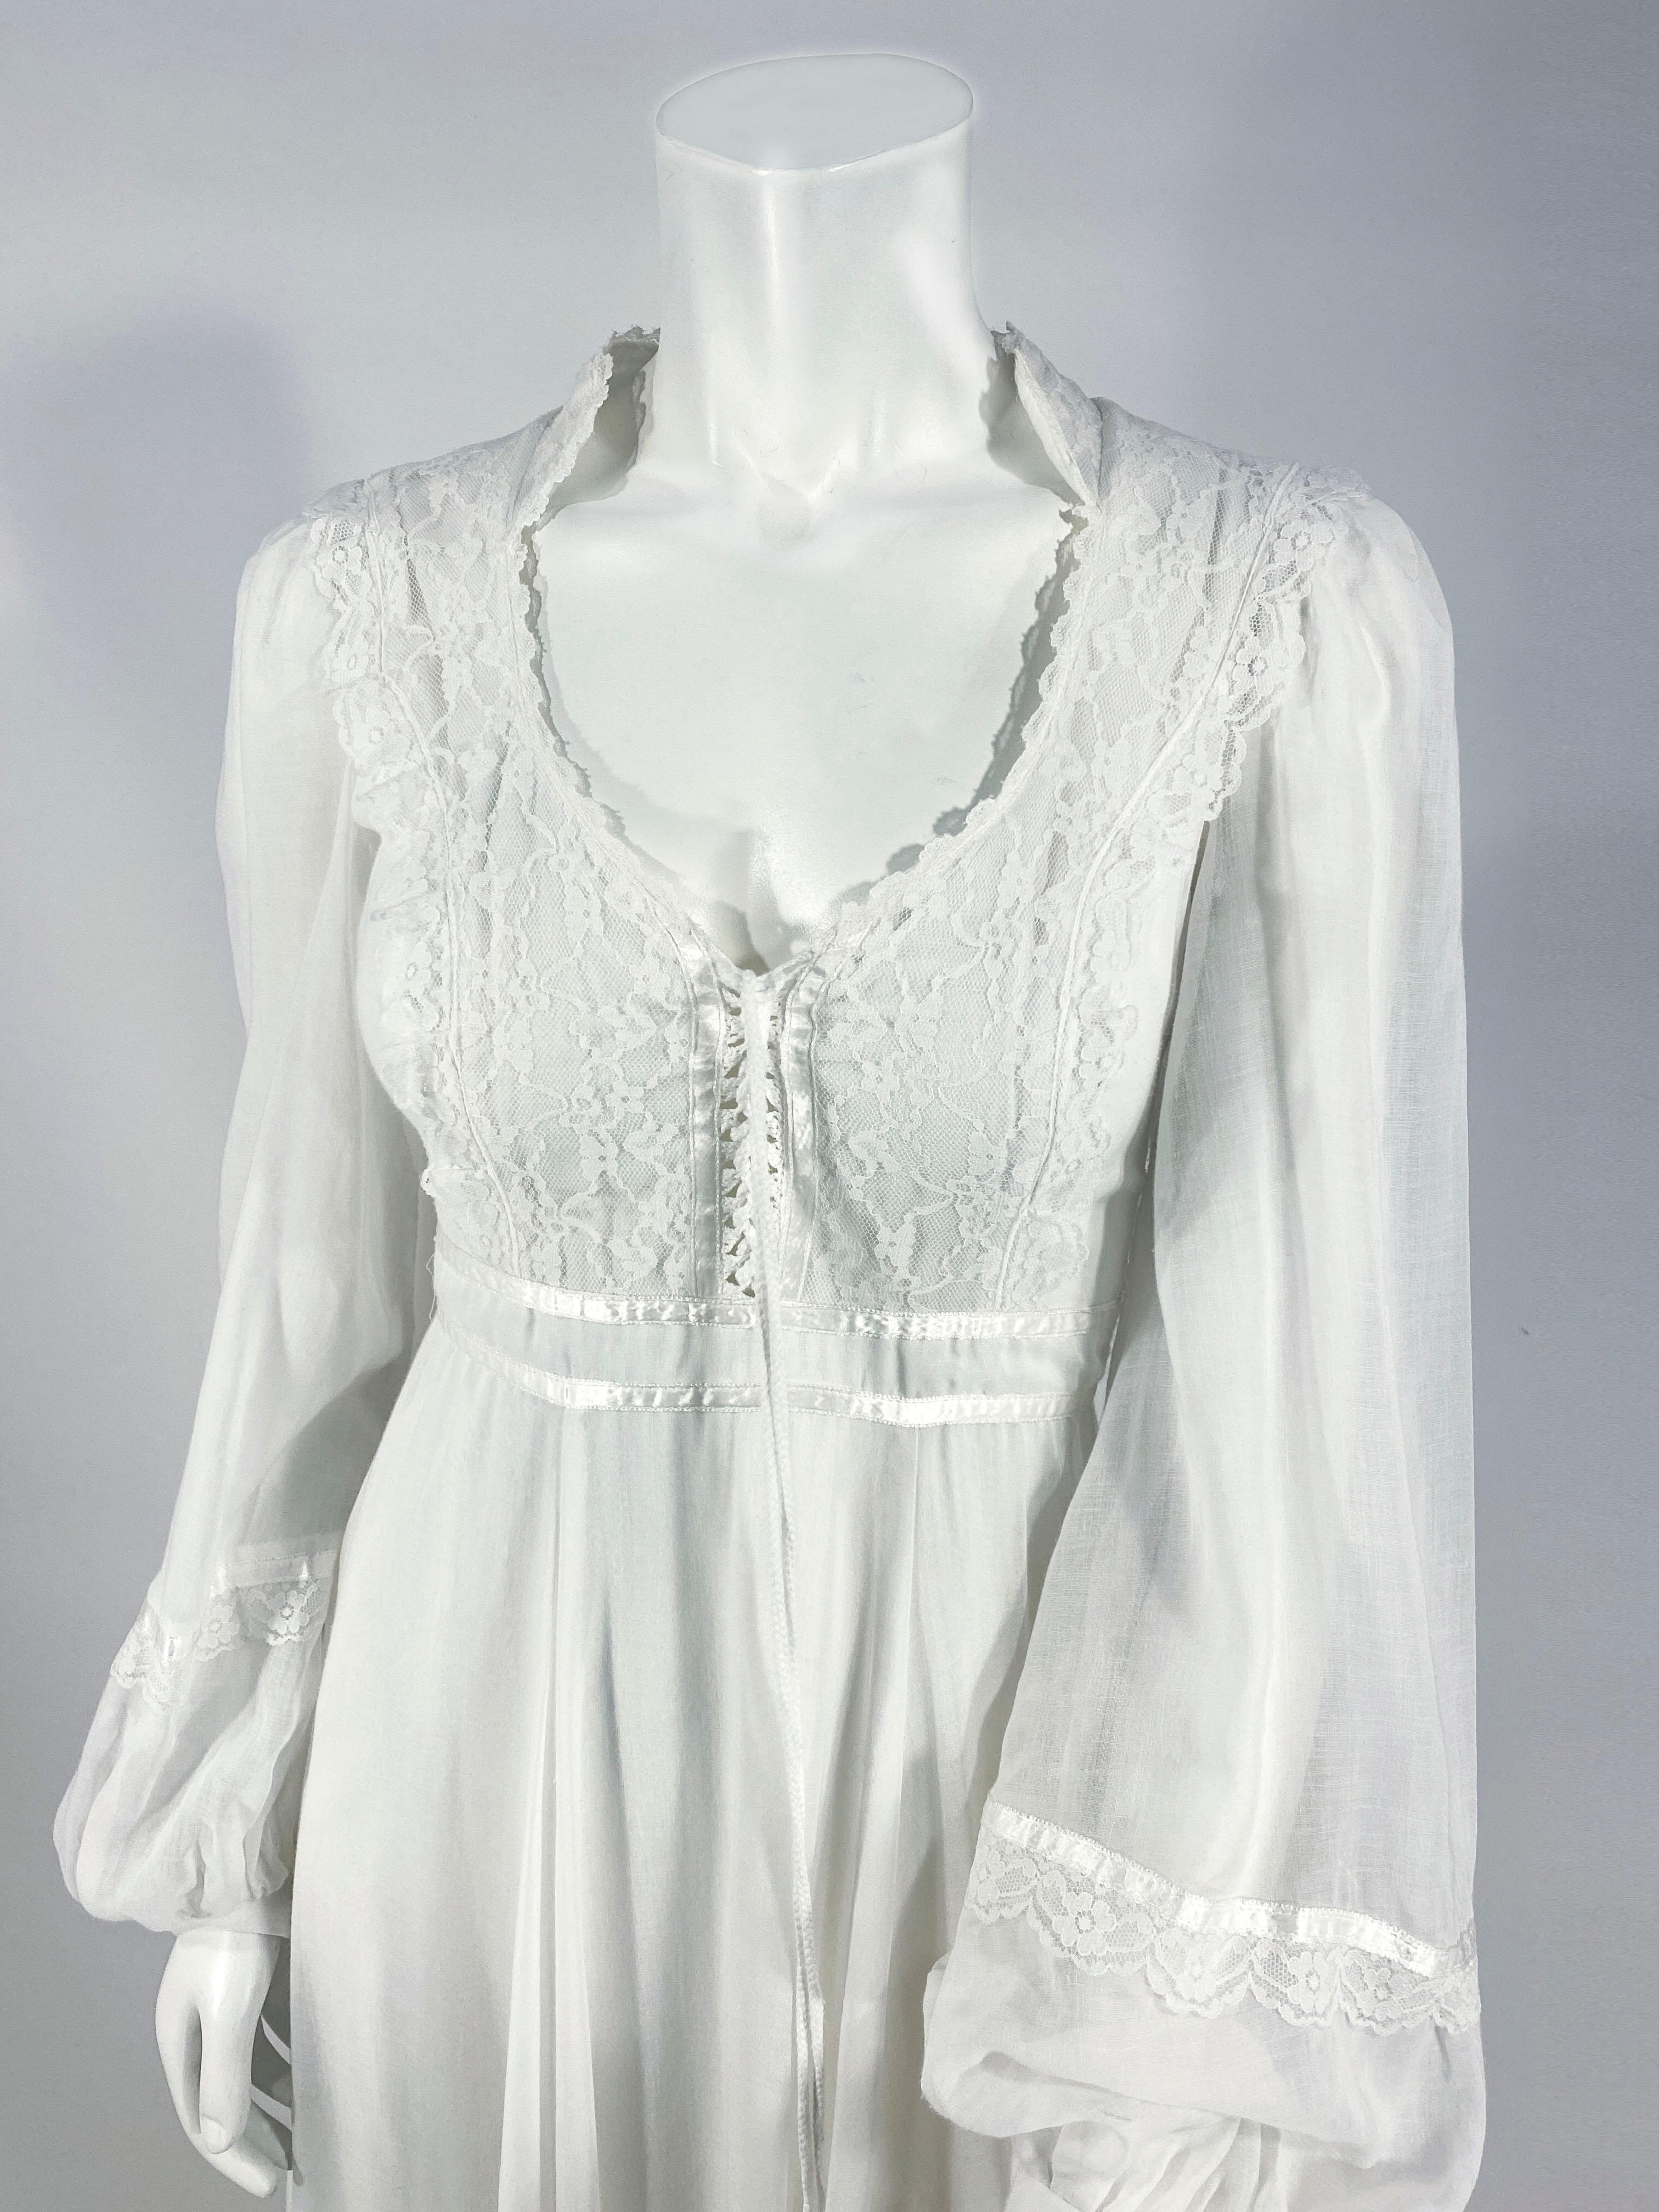 1970's Gunne Sax white cotton voile cottage dress with lace and satin ribbon trim, lace-up bodice, full cuffed sleeves, full length skirt finished with lace and a wide ruffled hem. The was it has an applied sash that ties in the back over the zipper